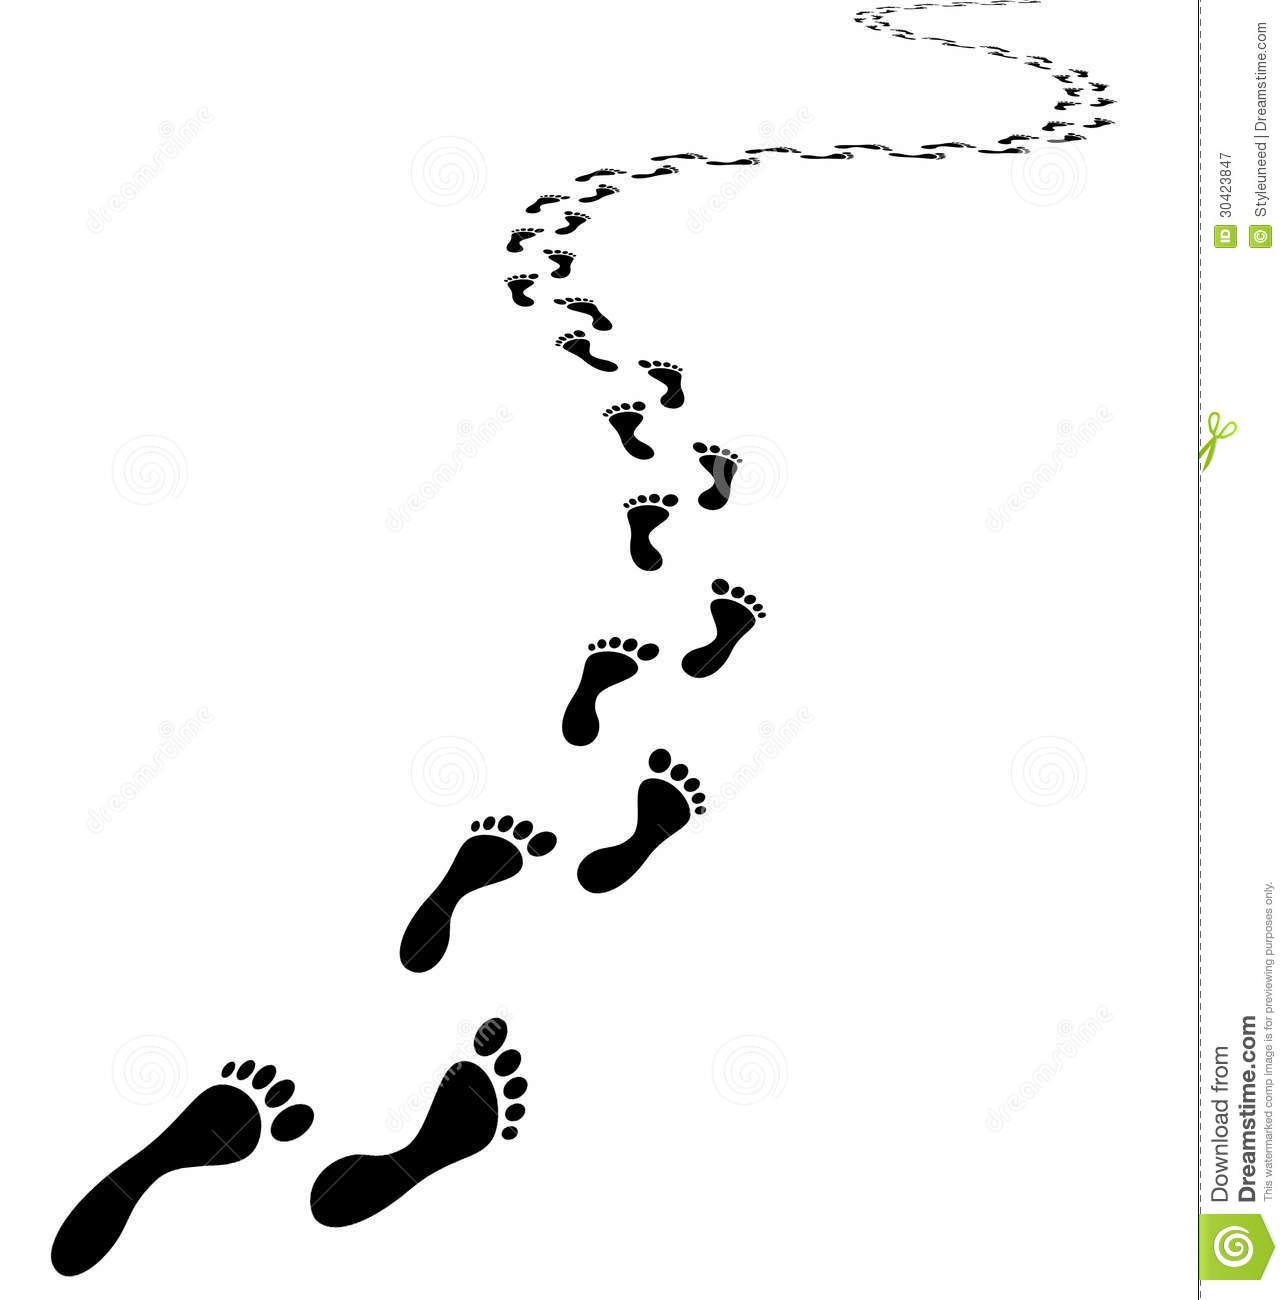 footprints clipart black and white - Clipground